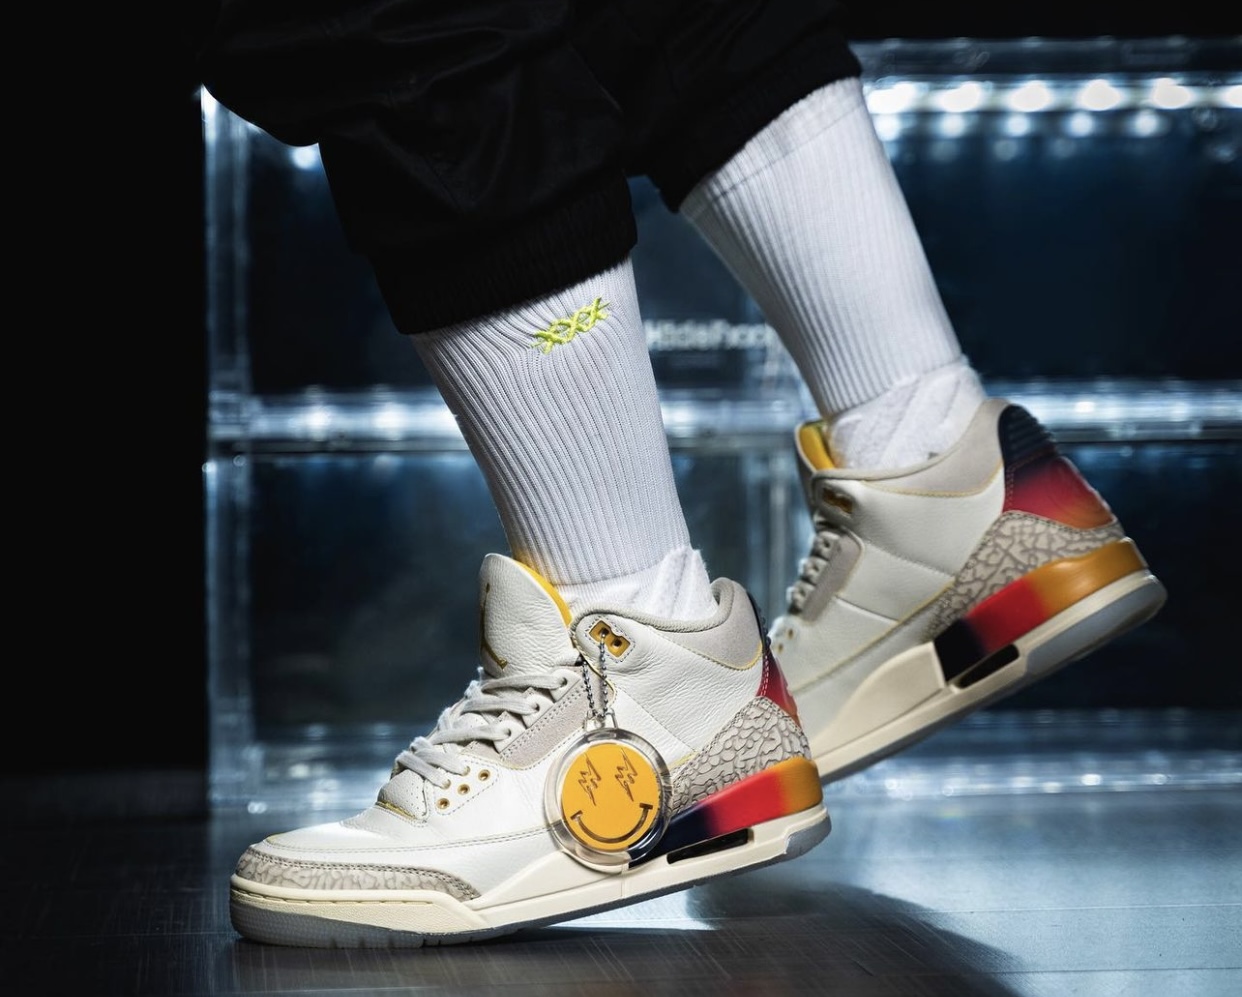 J Balvin x Nike Air Jordan 3 Medellin Sunset sneakers: Where to get,  price, release date, and more details explored